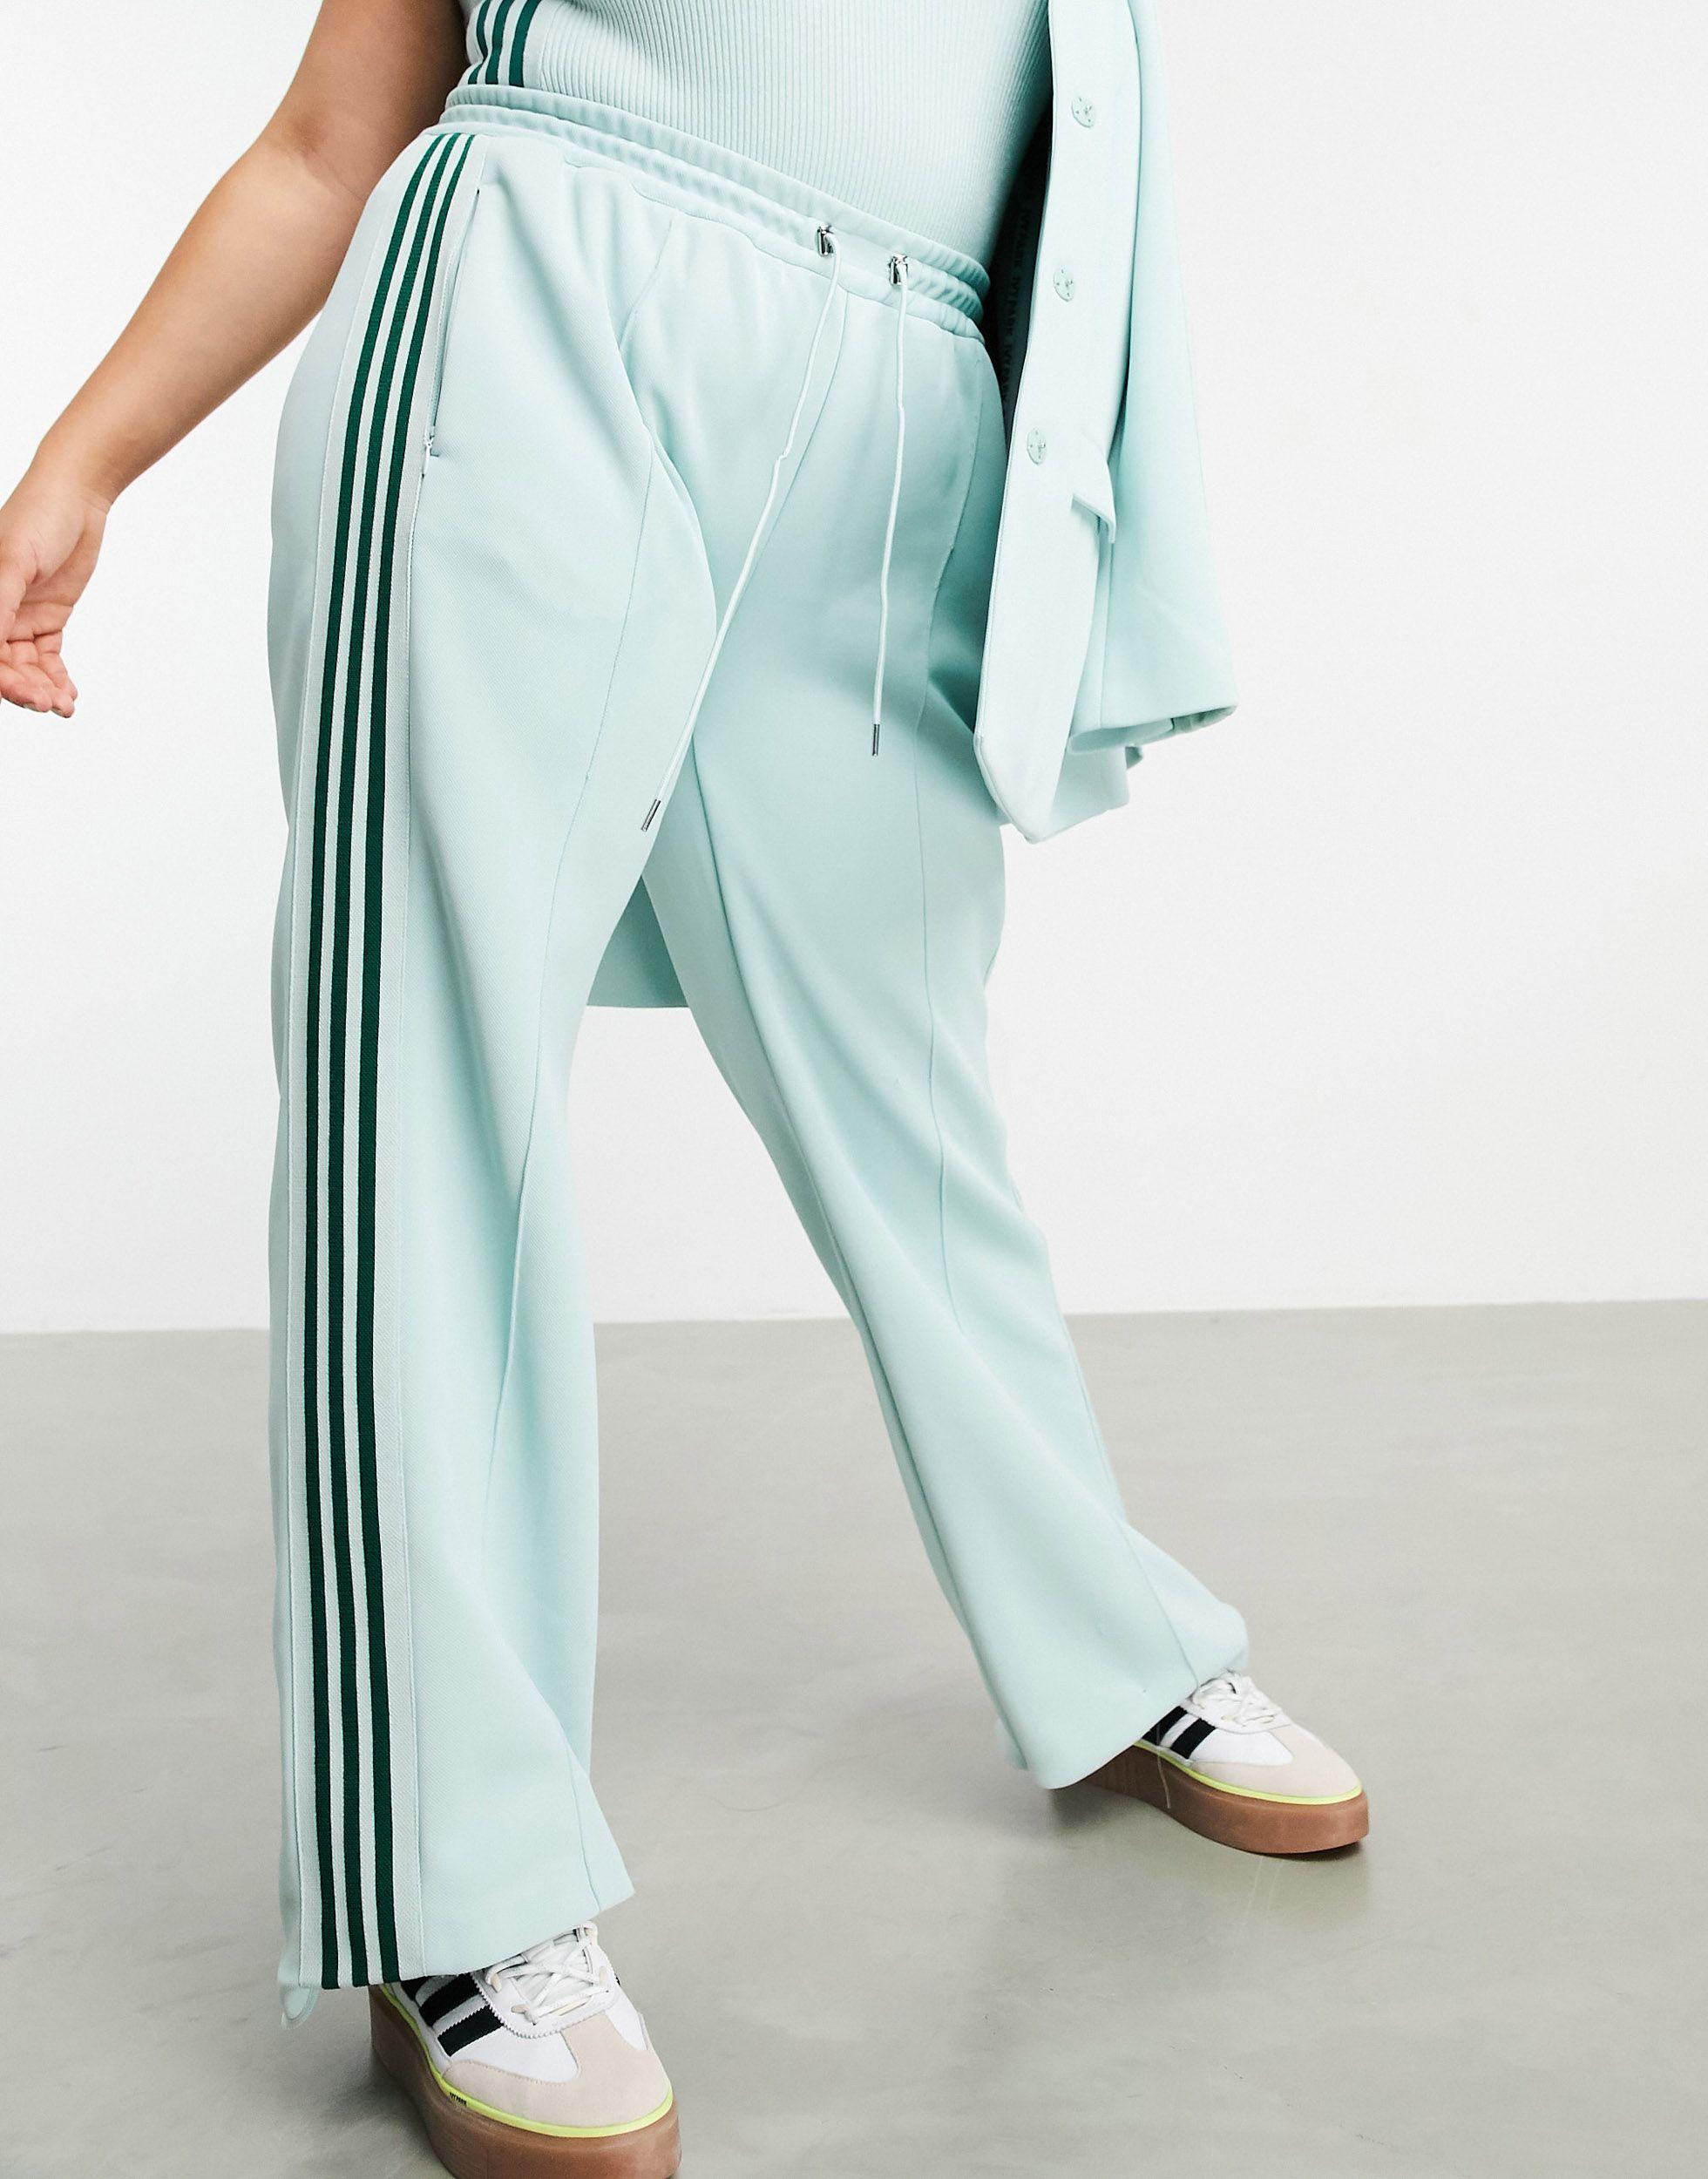 Ivy Park Adidas X Plus Wide Leg Trousers in Green